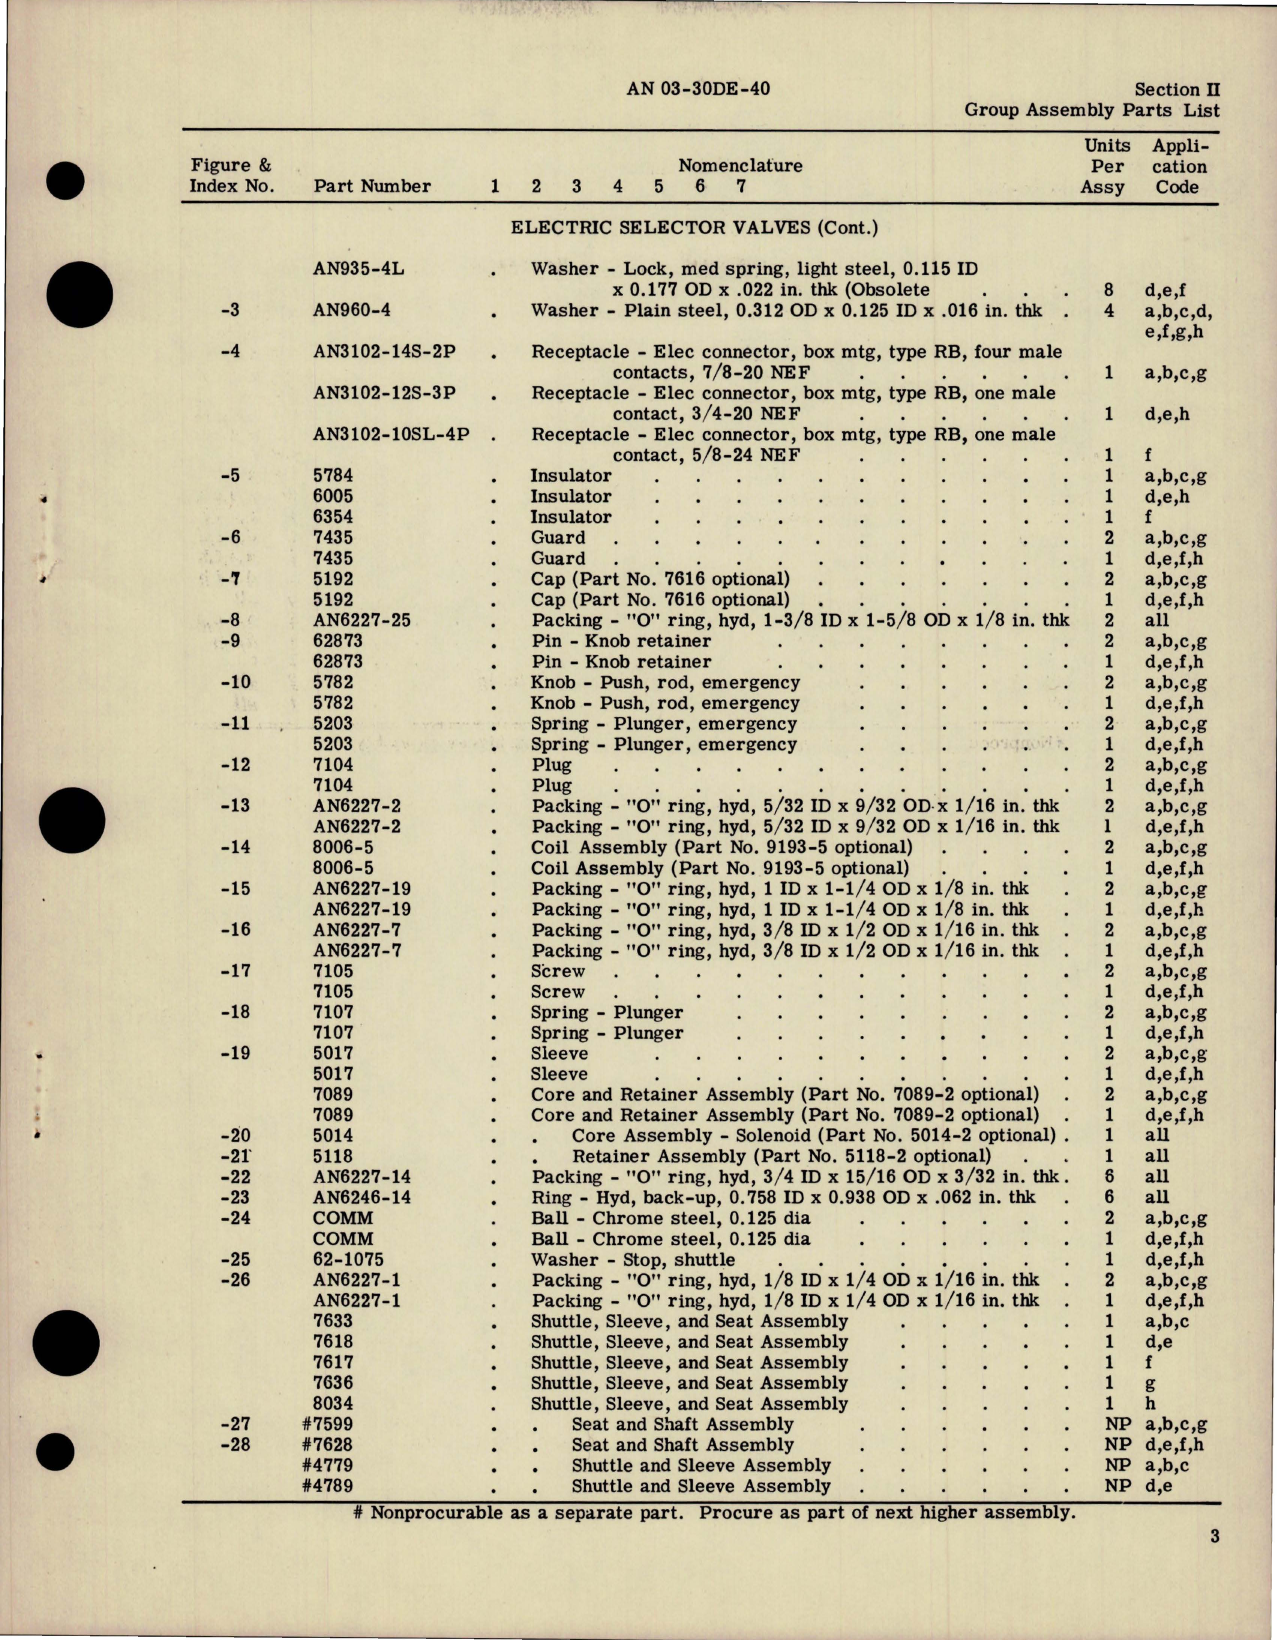 Sample page 5 from AirCorps Library document: Parts Catalog for Electric Selector Valves 